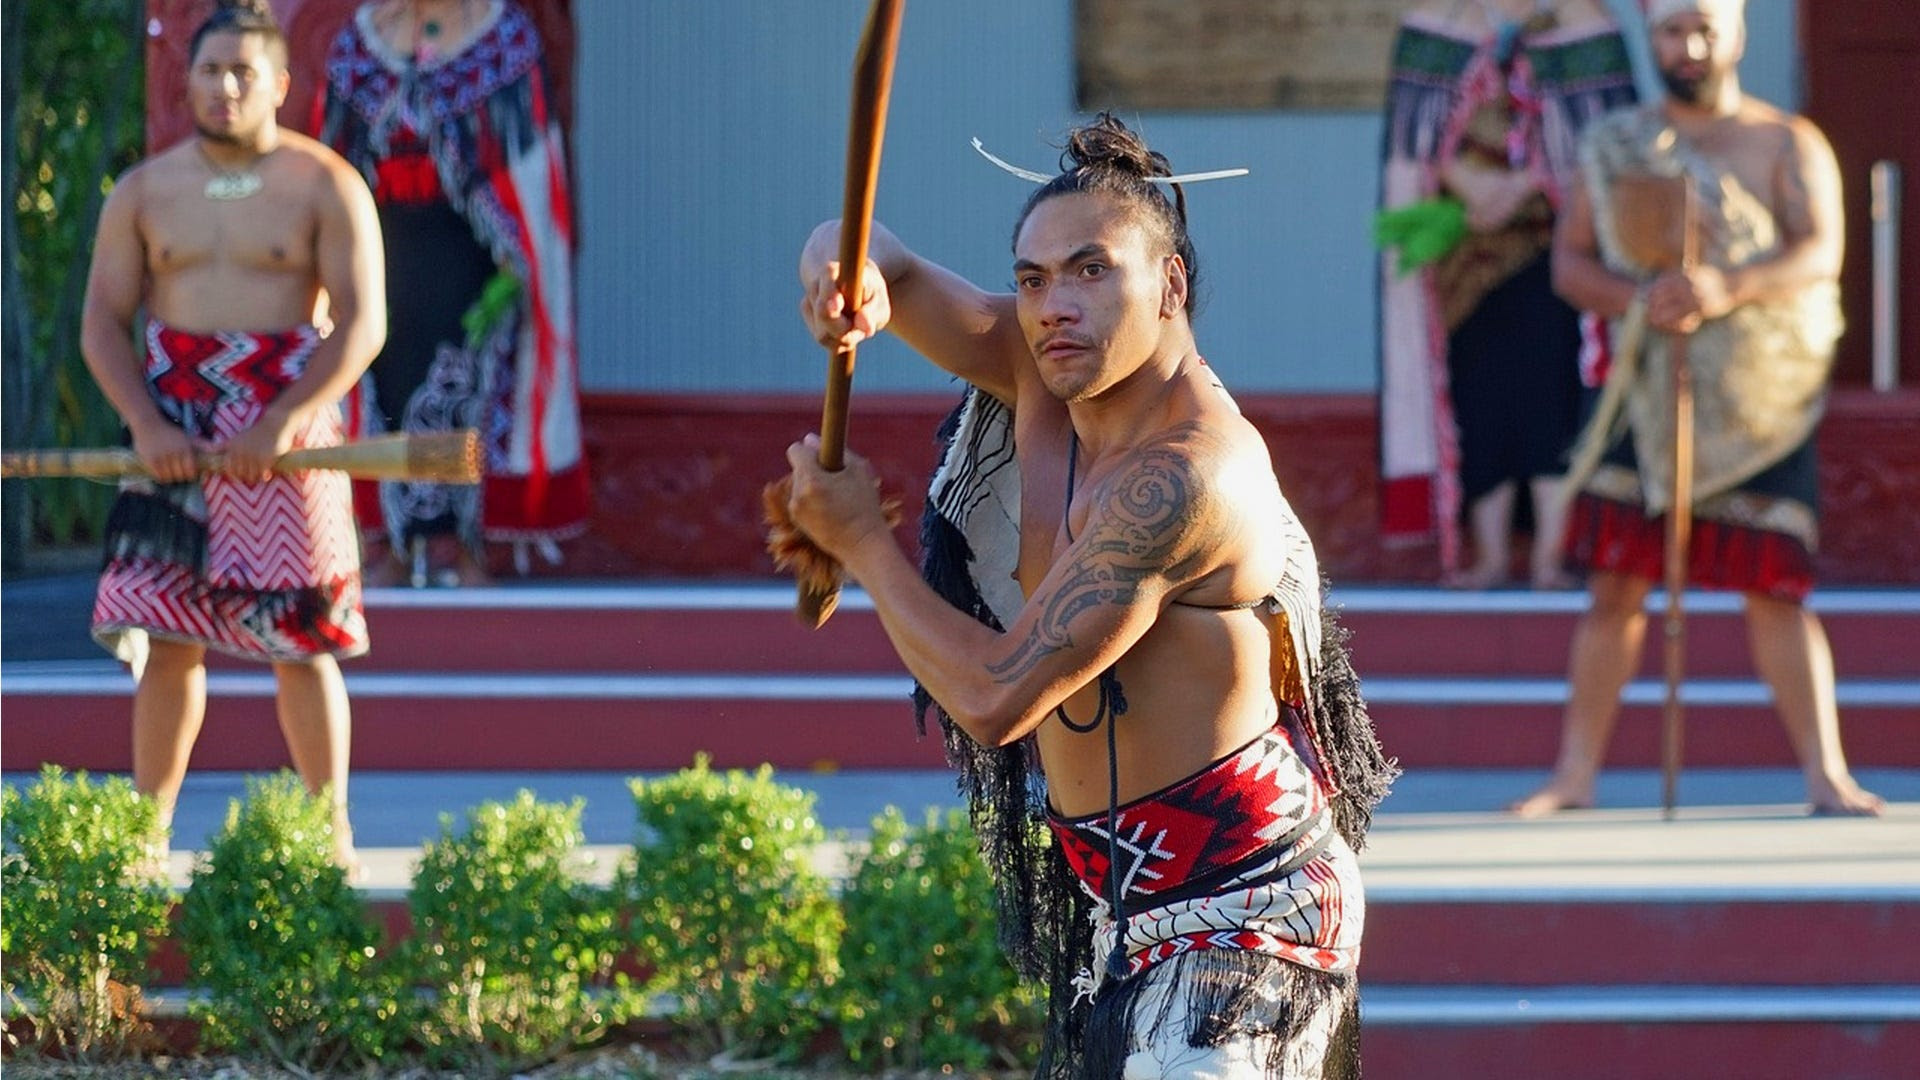  Reiner Fuellmich: On Standing With the Māori People of New Zealand Who Never Ceded Their Independence Https%3A%2F%2Fsubstack-post-media.s3.amazonaws.com%2Fpublic%2Fimages%2F7902e788-2859-4ee3-9f46-8eb276e81e49_1920x1080